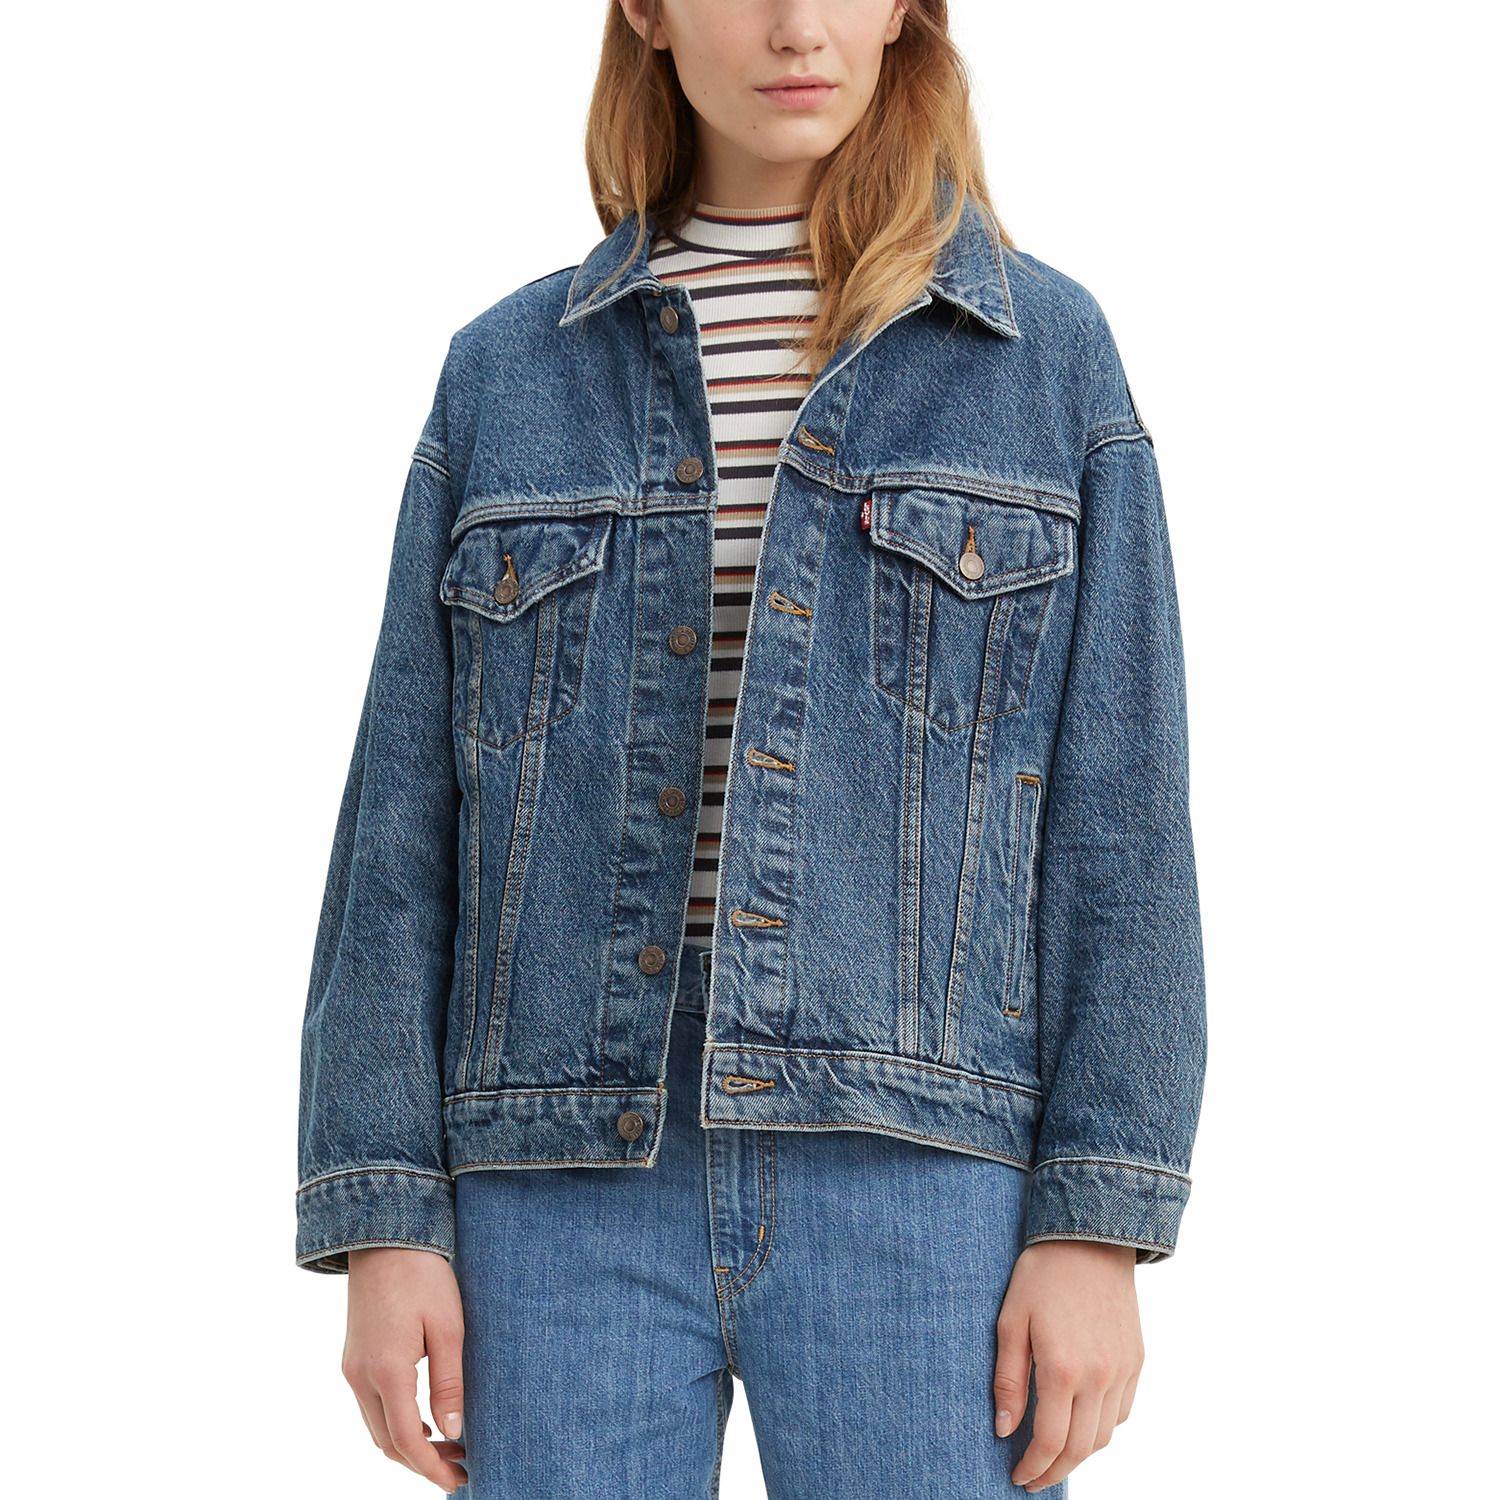 jean jackets for womens at kohls